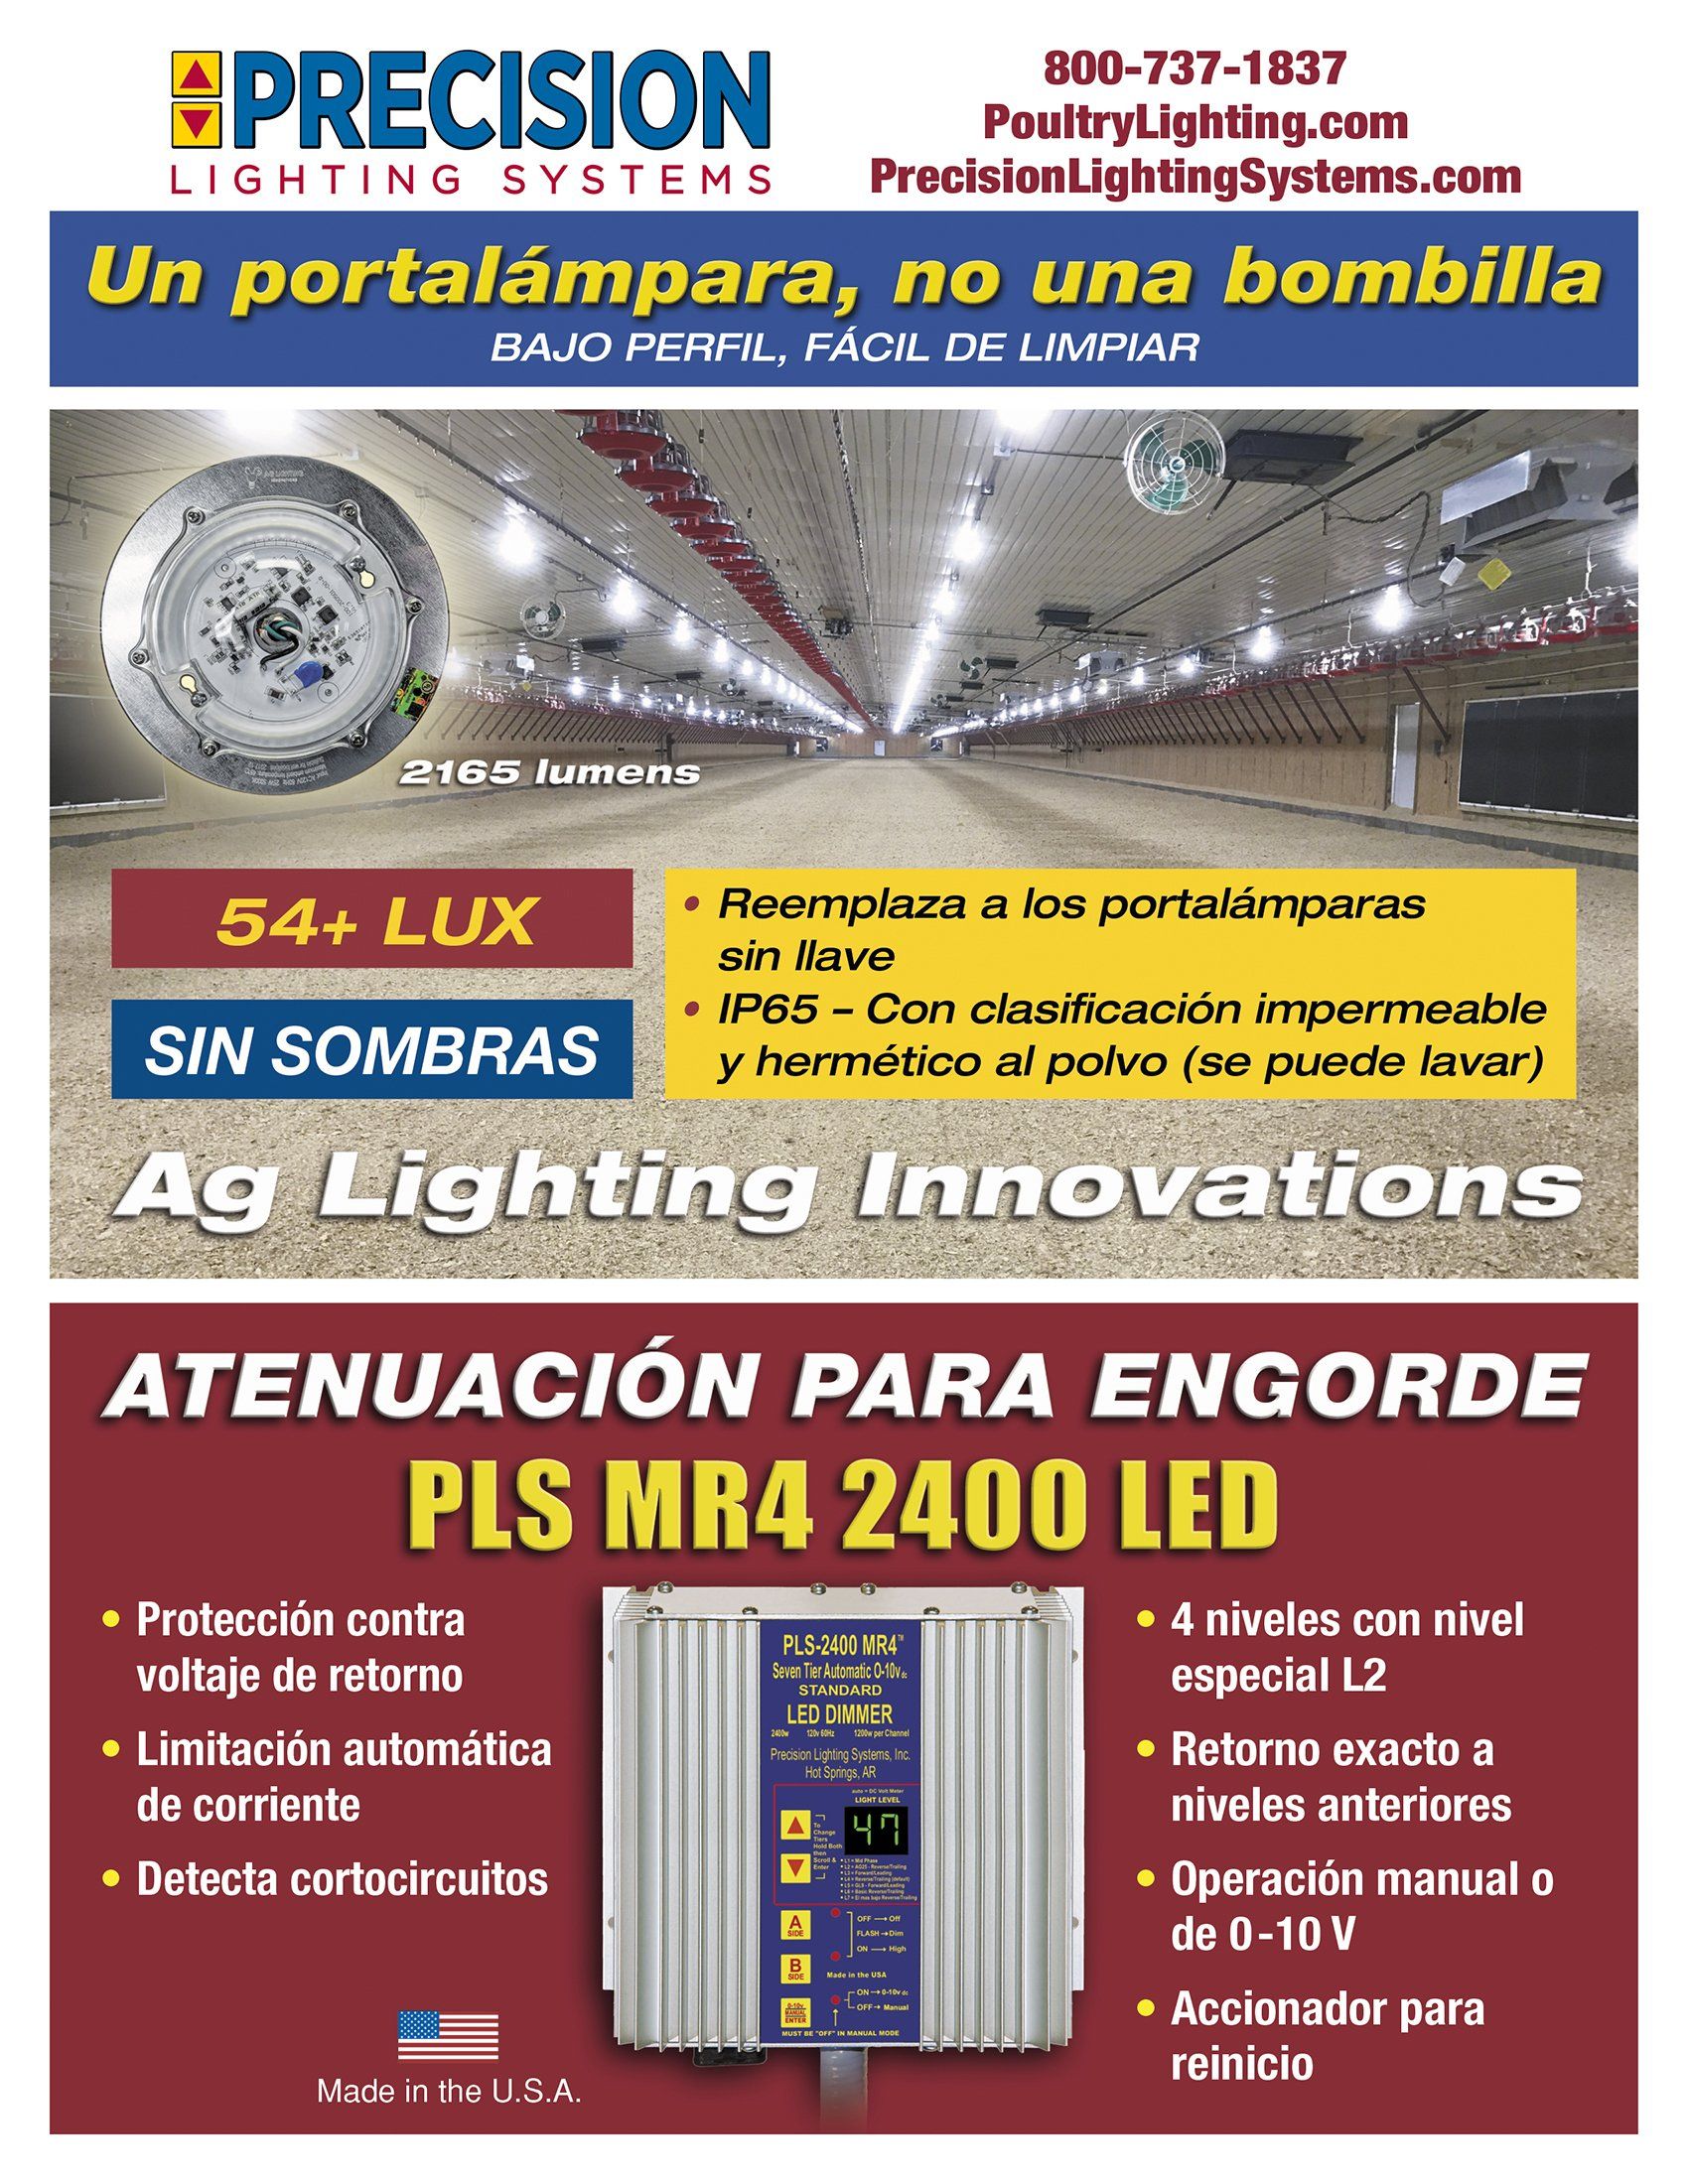 An advertisement for precision lighting shows a picture of a disco ball.